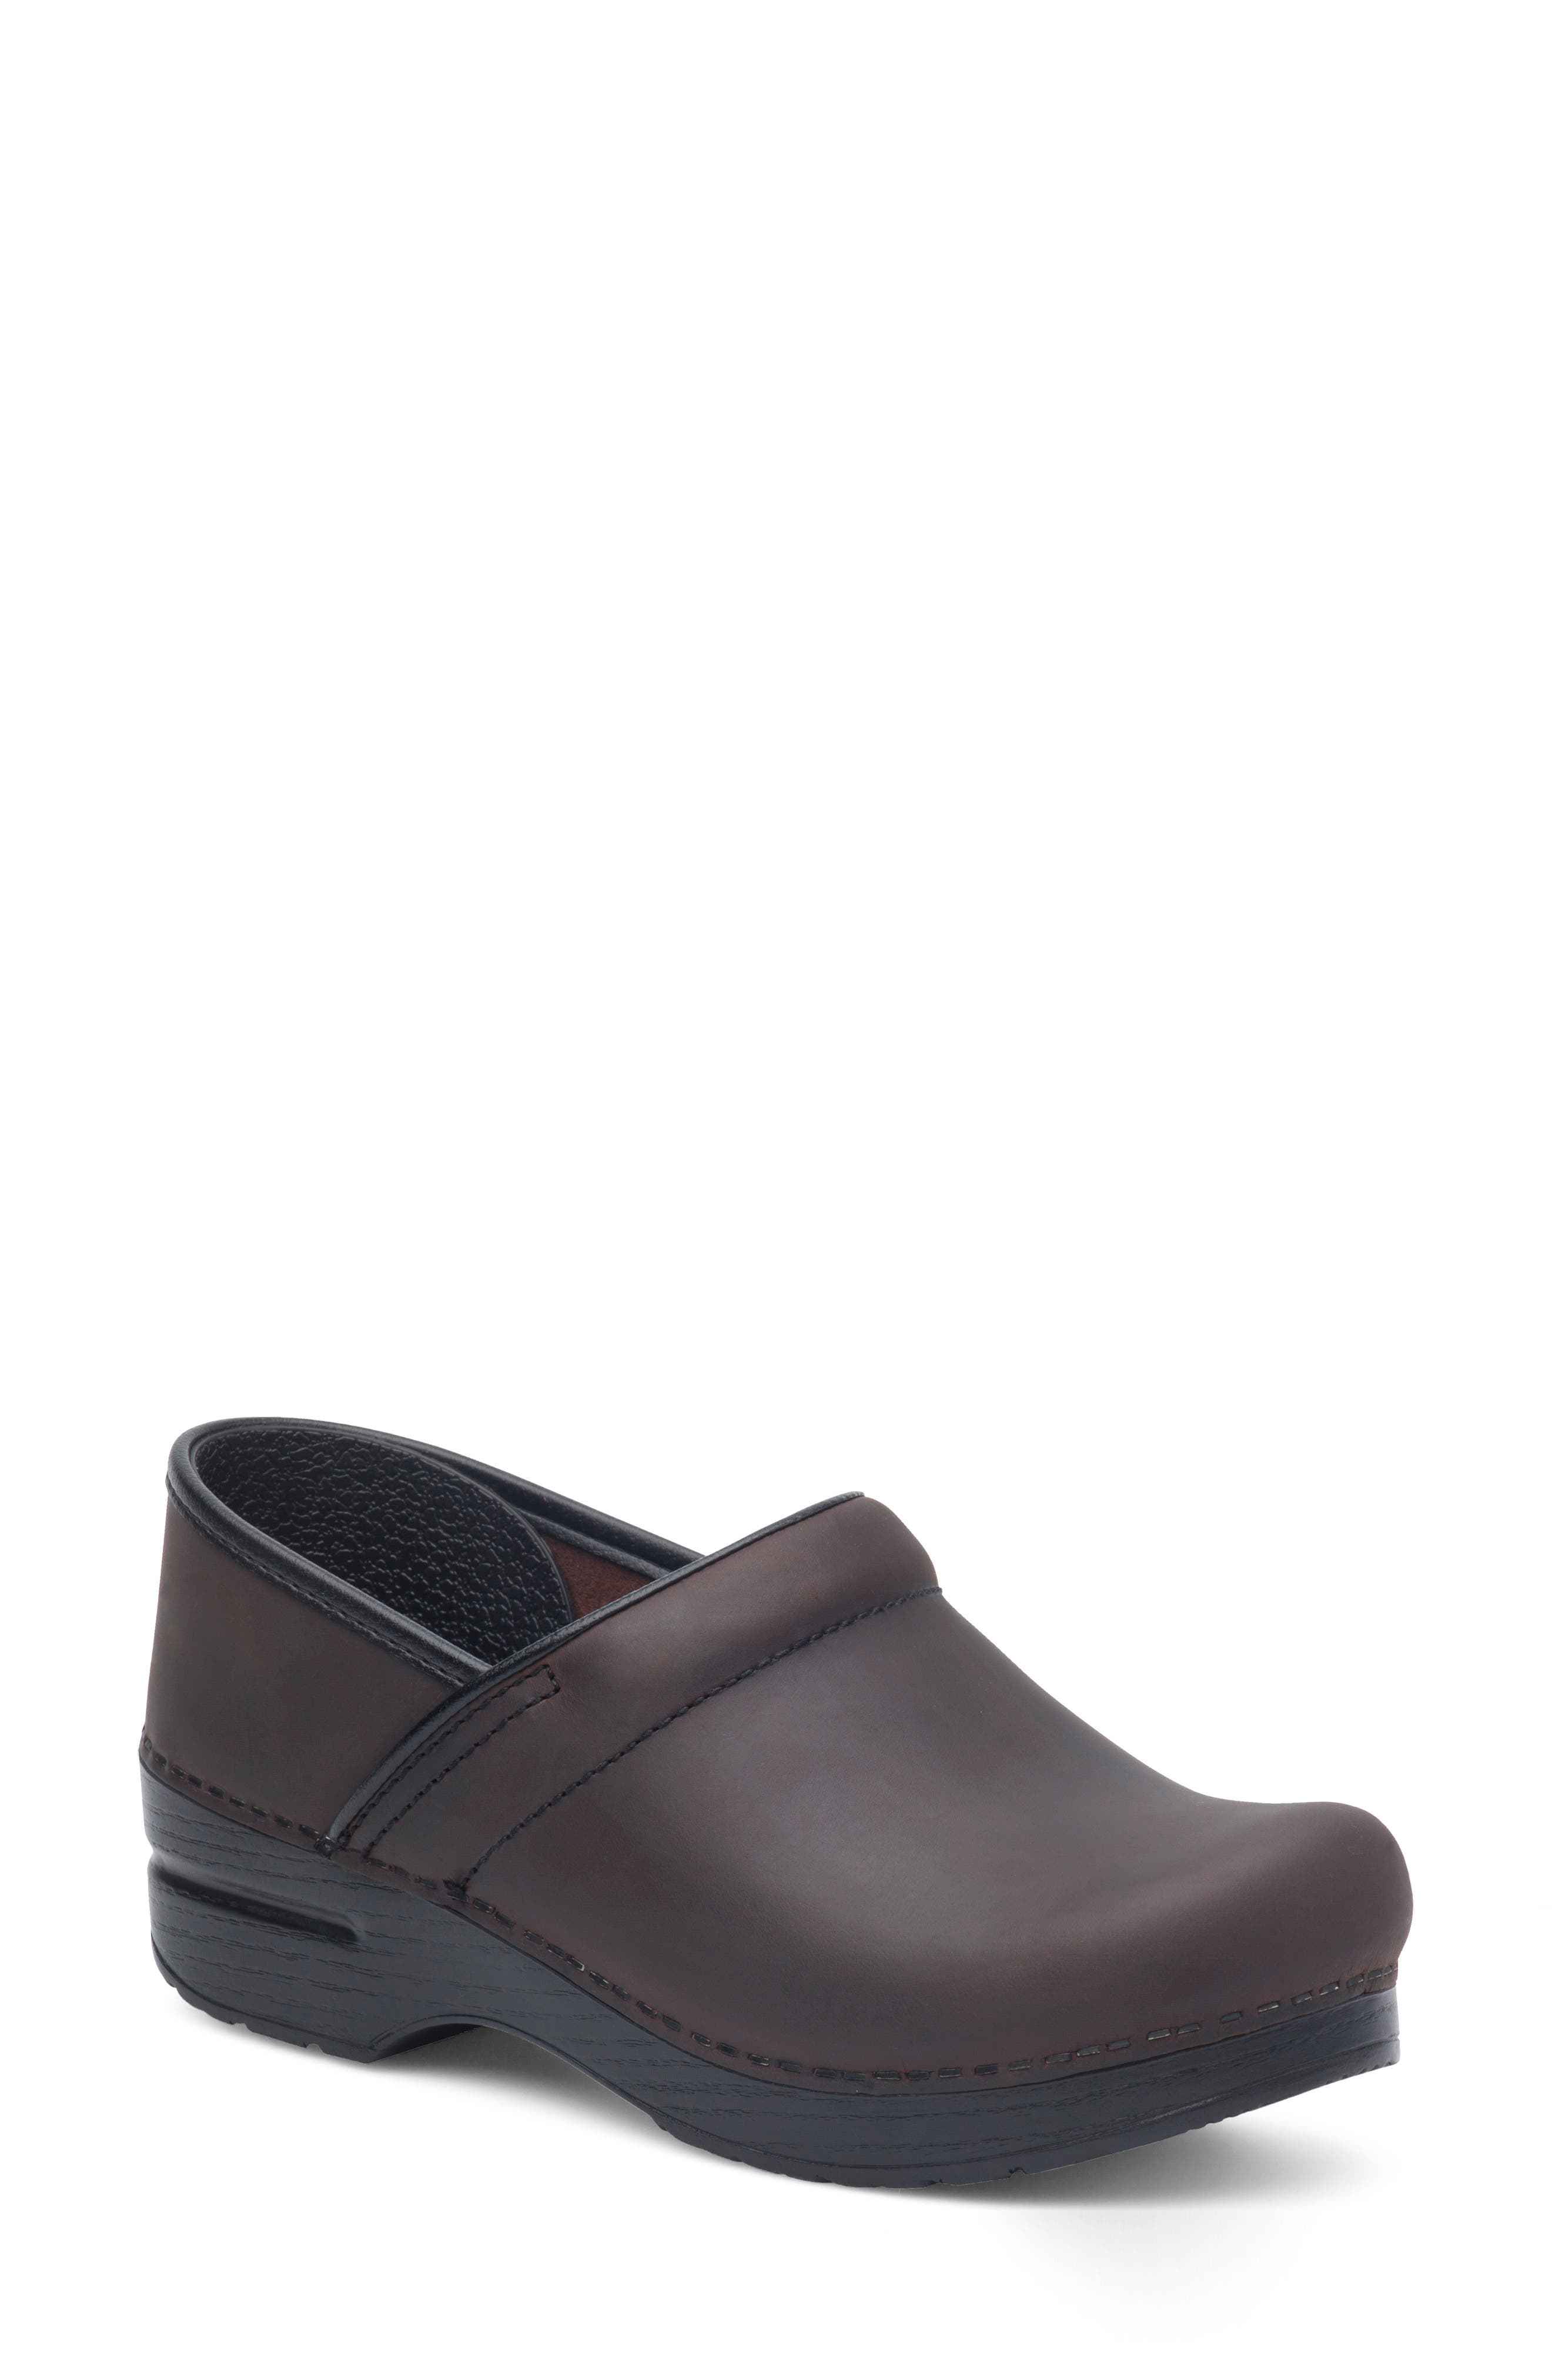 most comfortable womens clogs